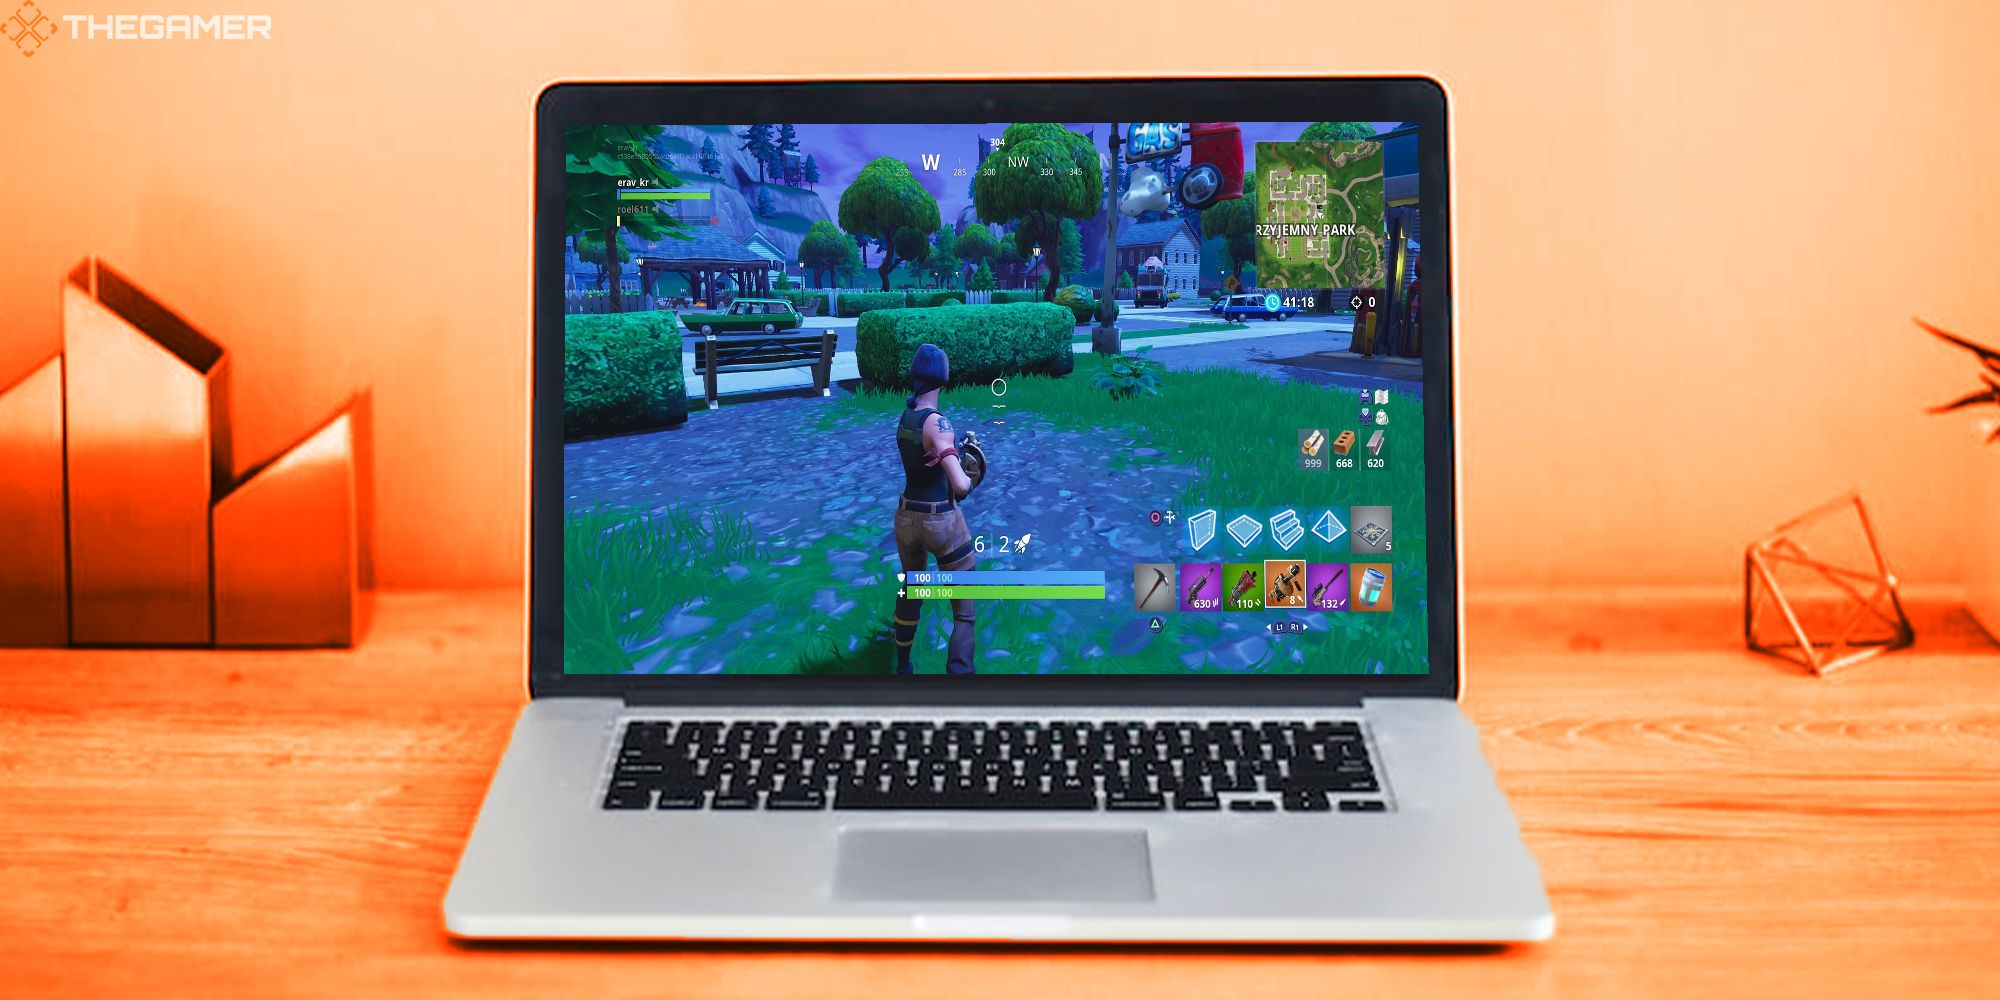 What is the best free-to-play game accessible on a laptop? - Quora